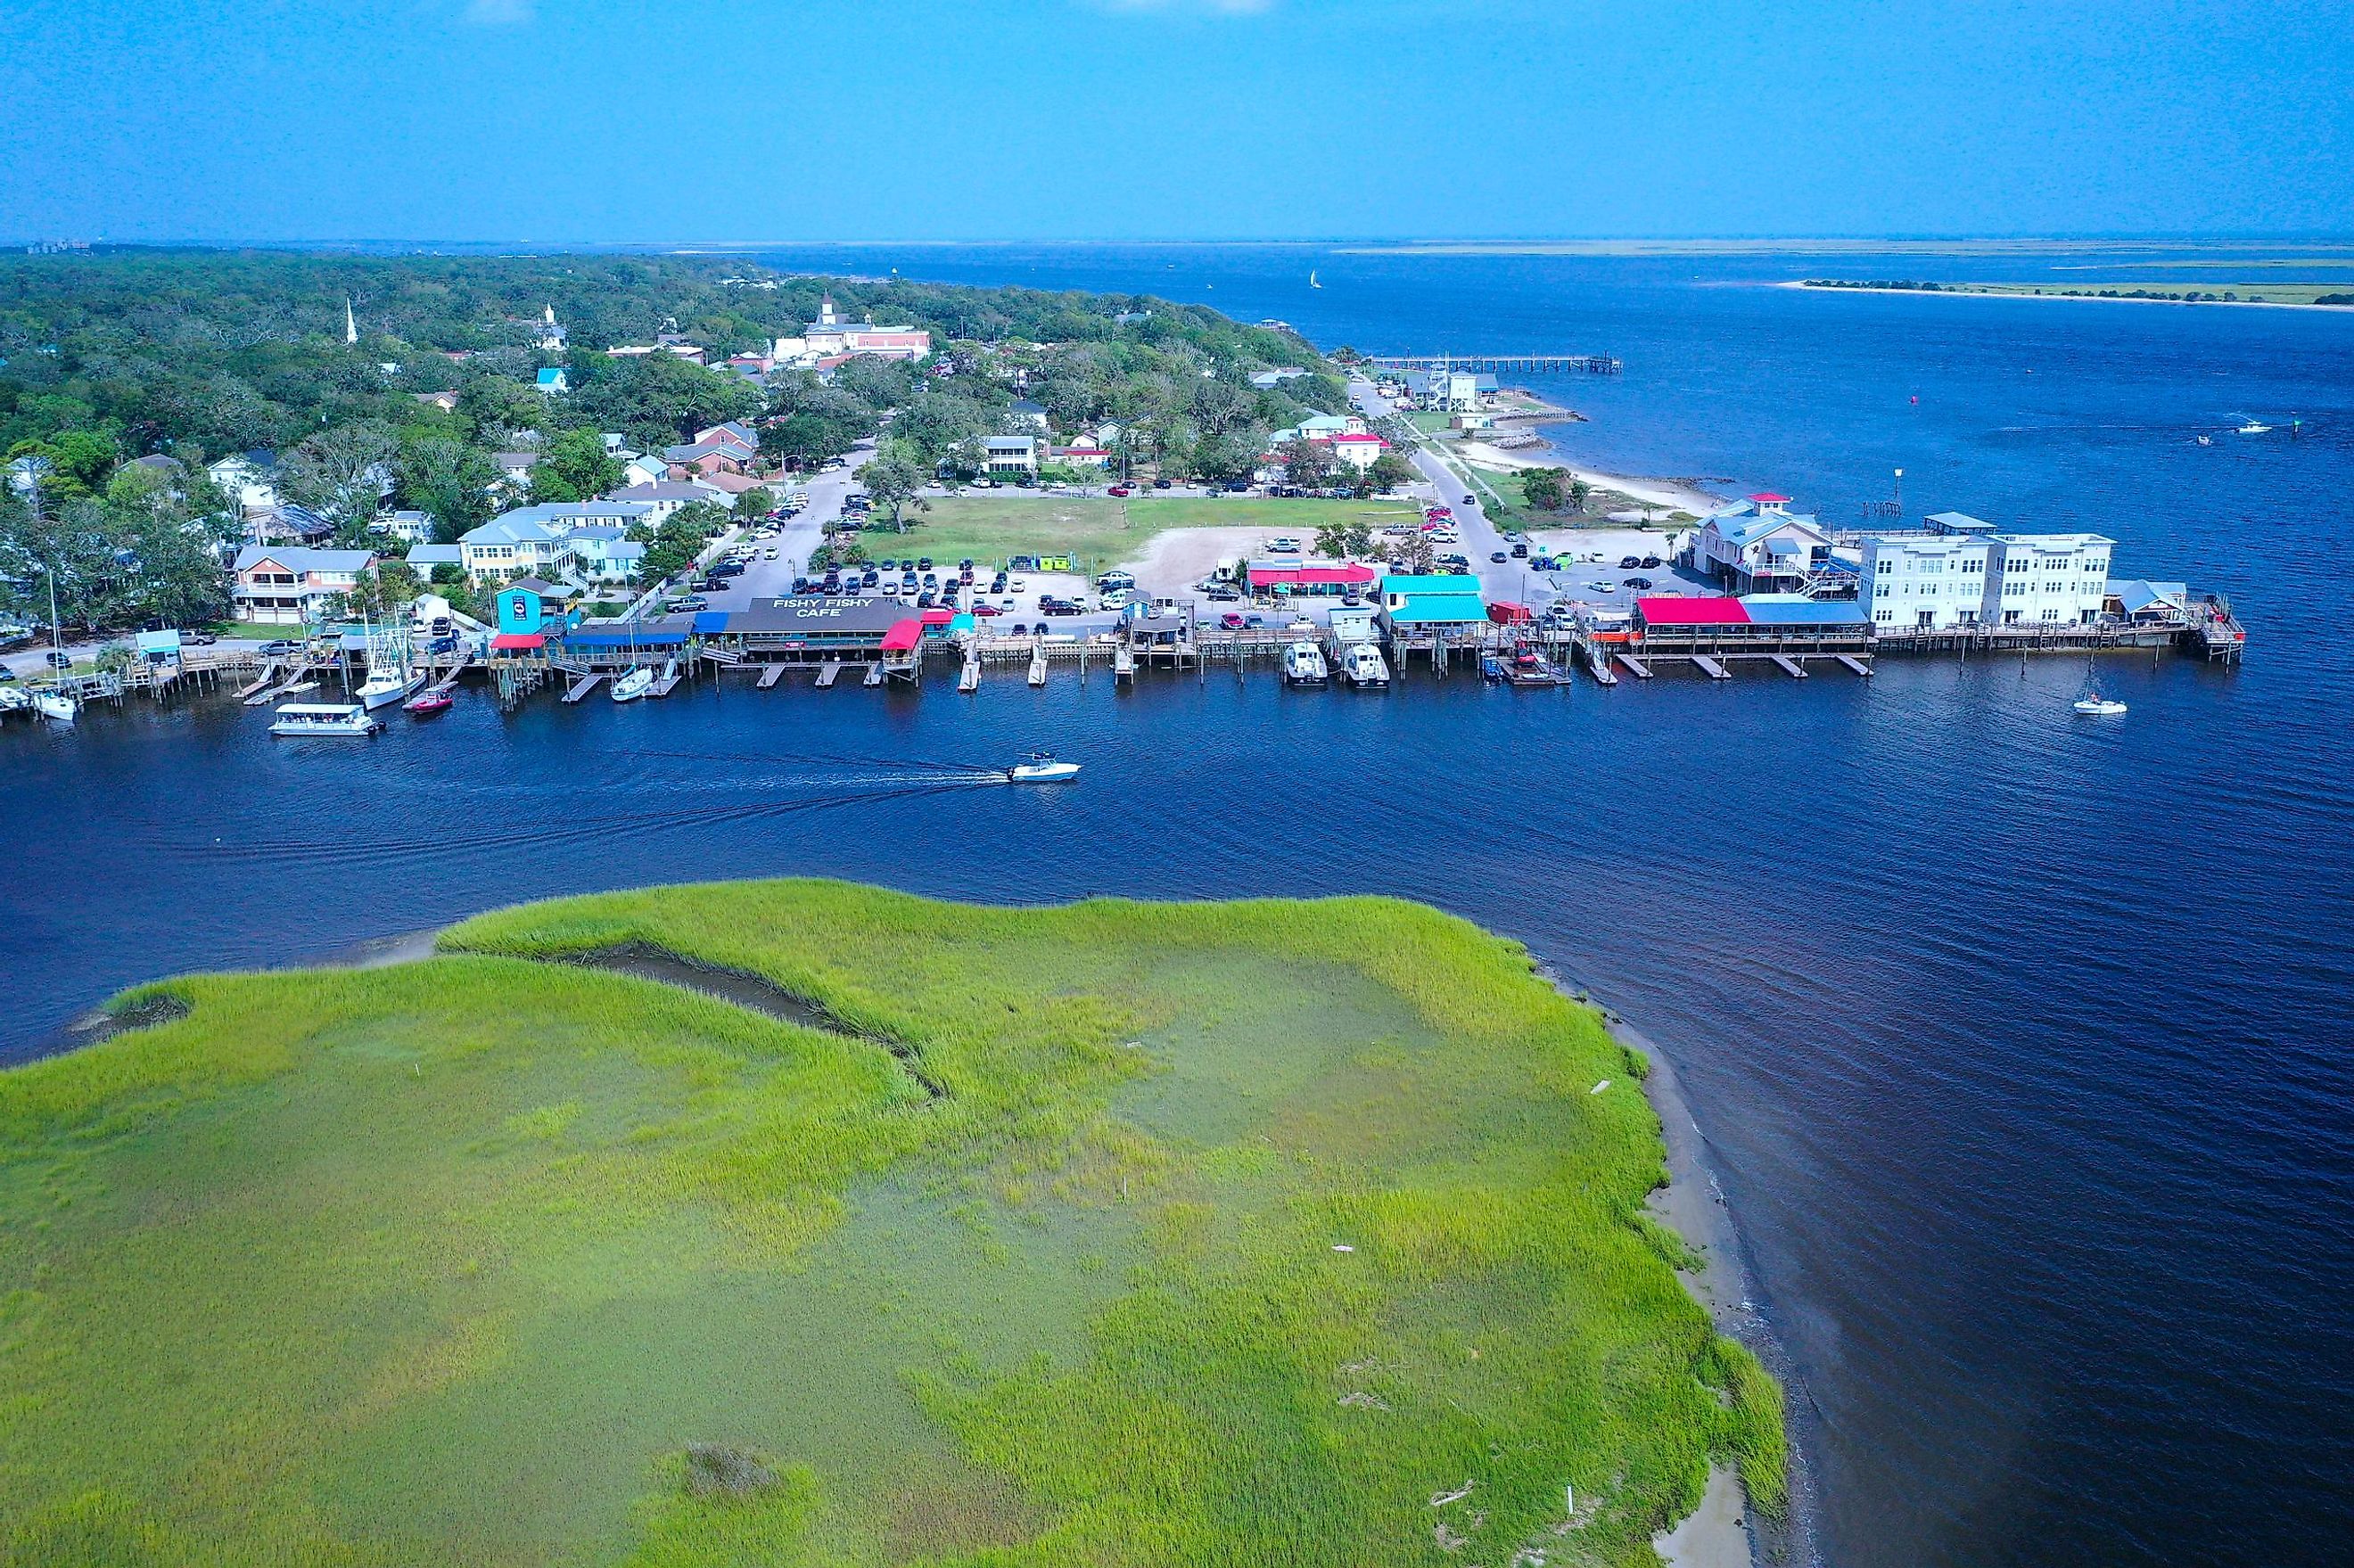 Aerial view of the town of Southport, North Carolina.